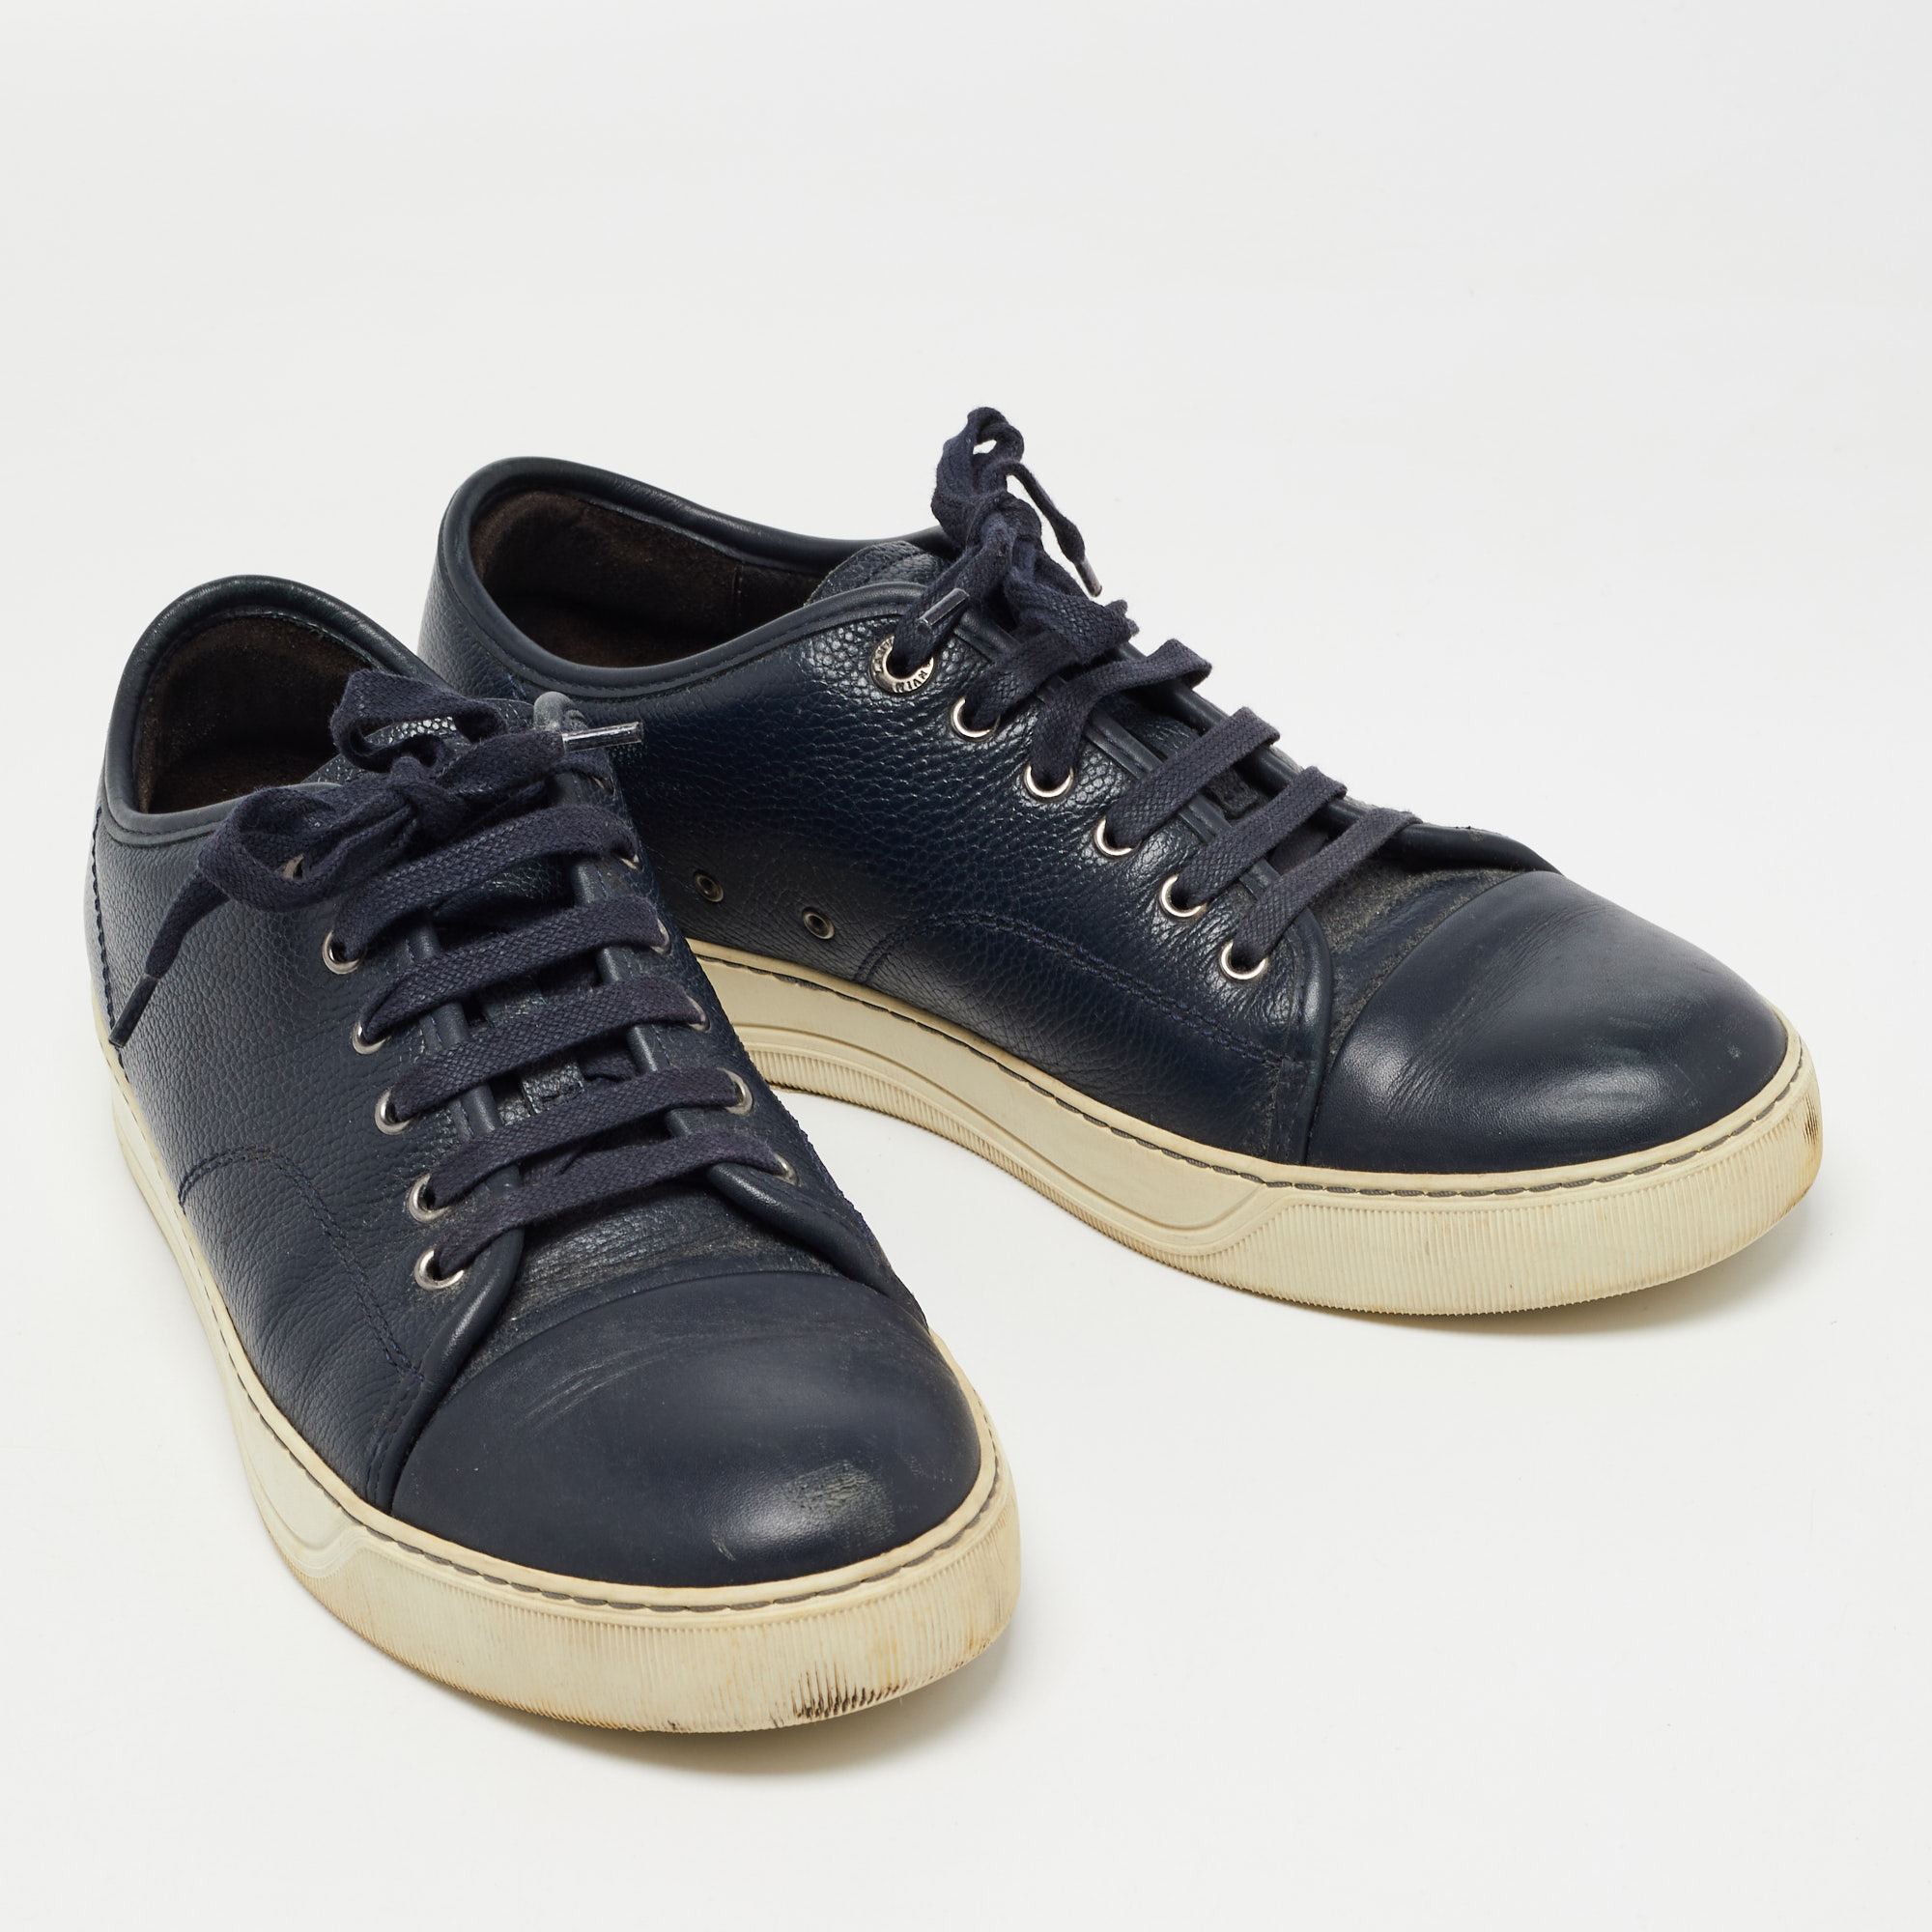 Lanvin Leather Navy Blue Leather Low Top Sneakers Size 41